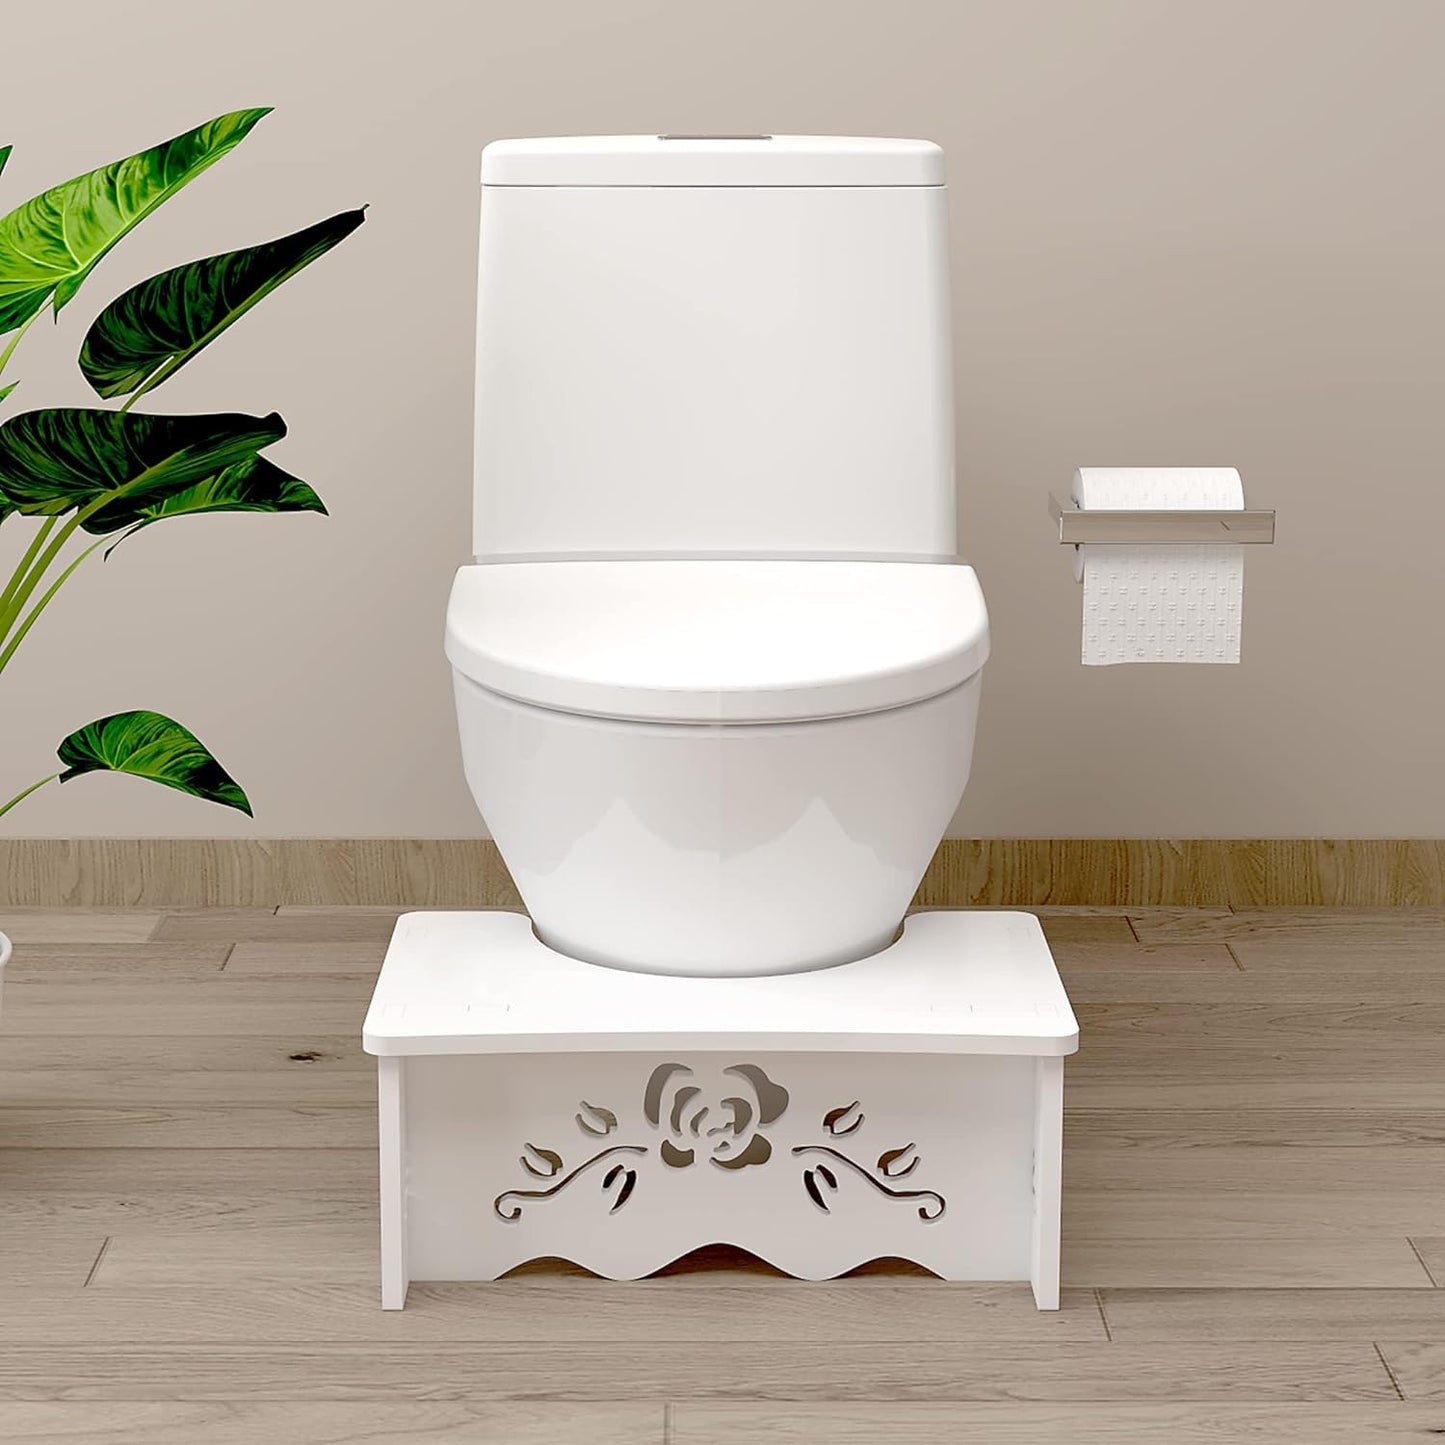 Fanwer Potty Stool for Pooping Made of Wood-Plastic Board for Adults, Suitable to Bring on Travel